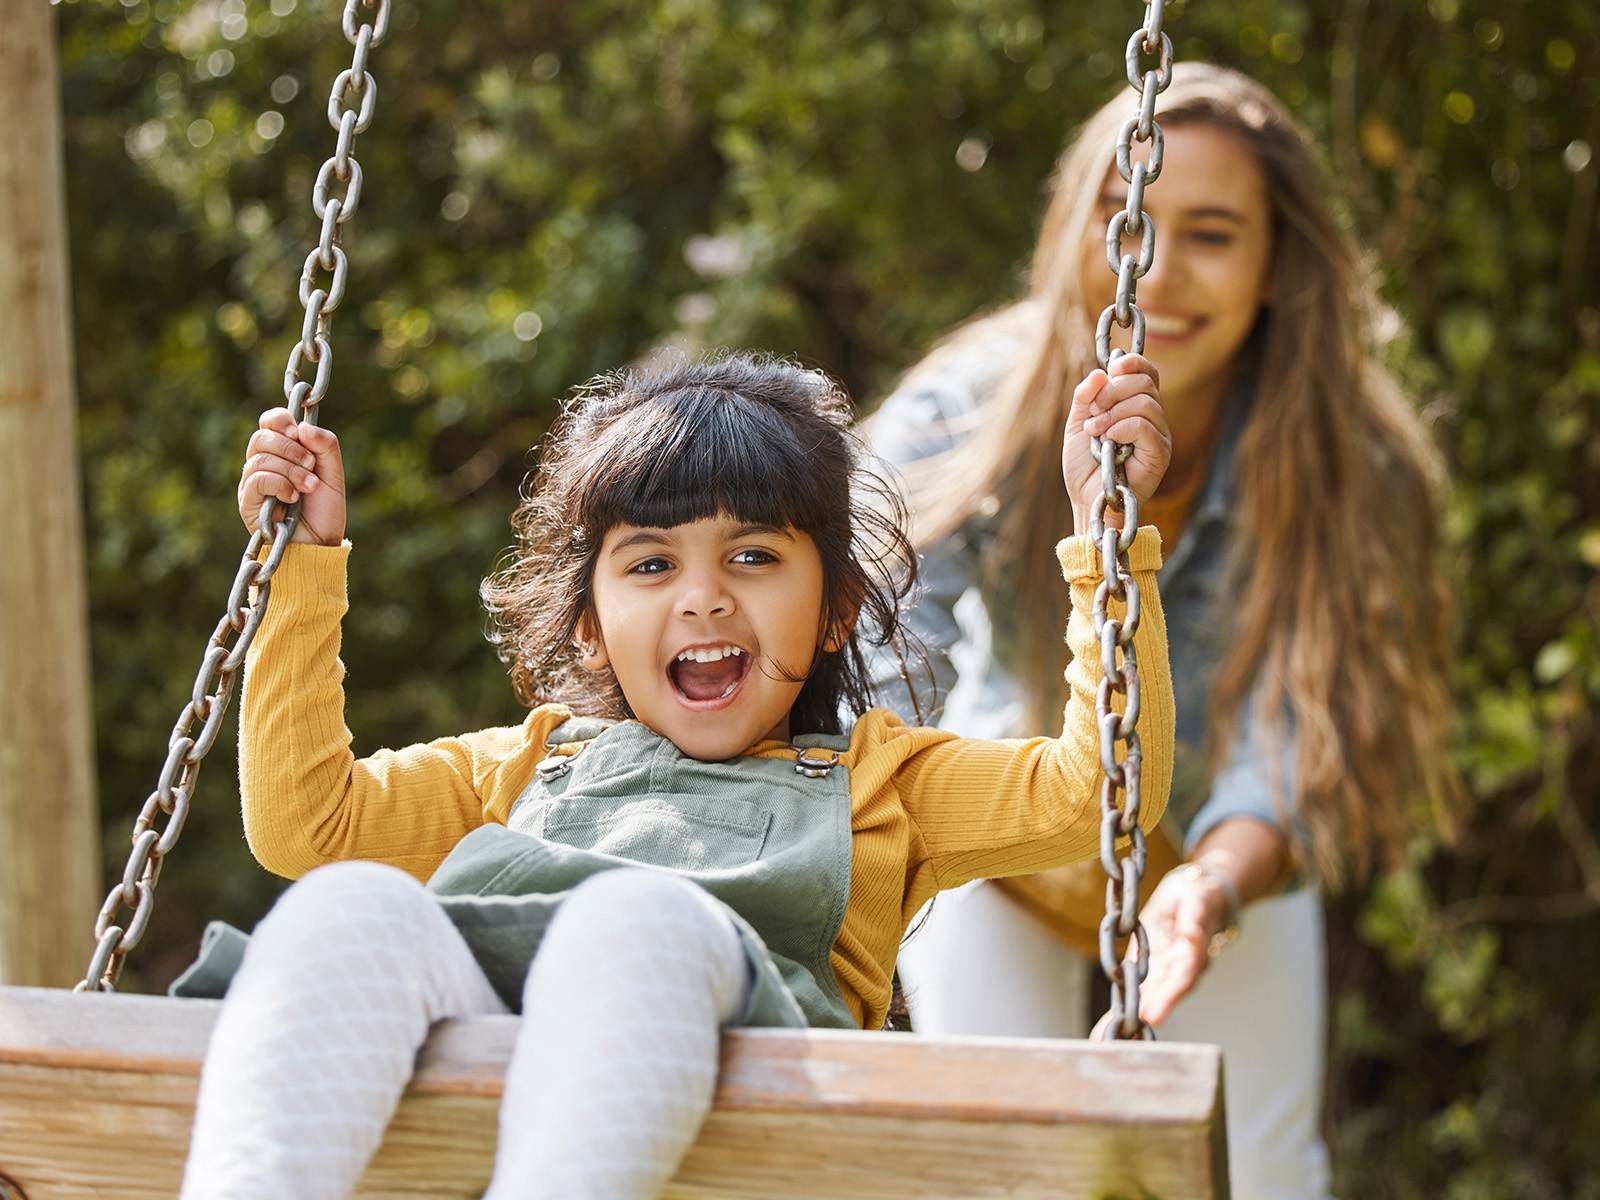 Child being pushed on a swing by an adult.